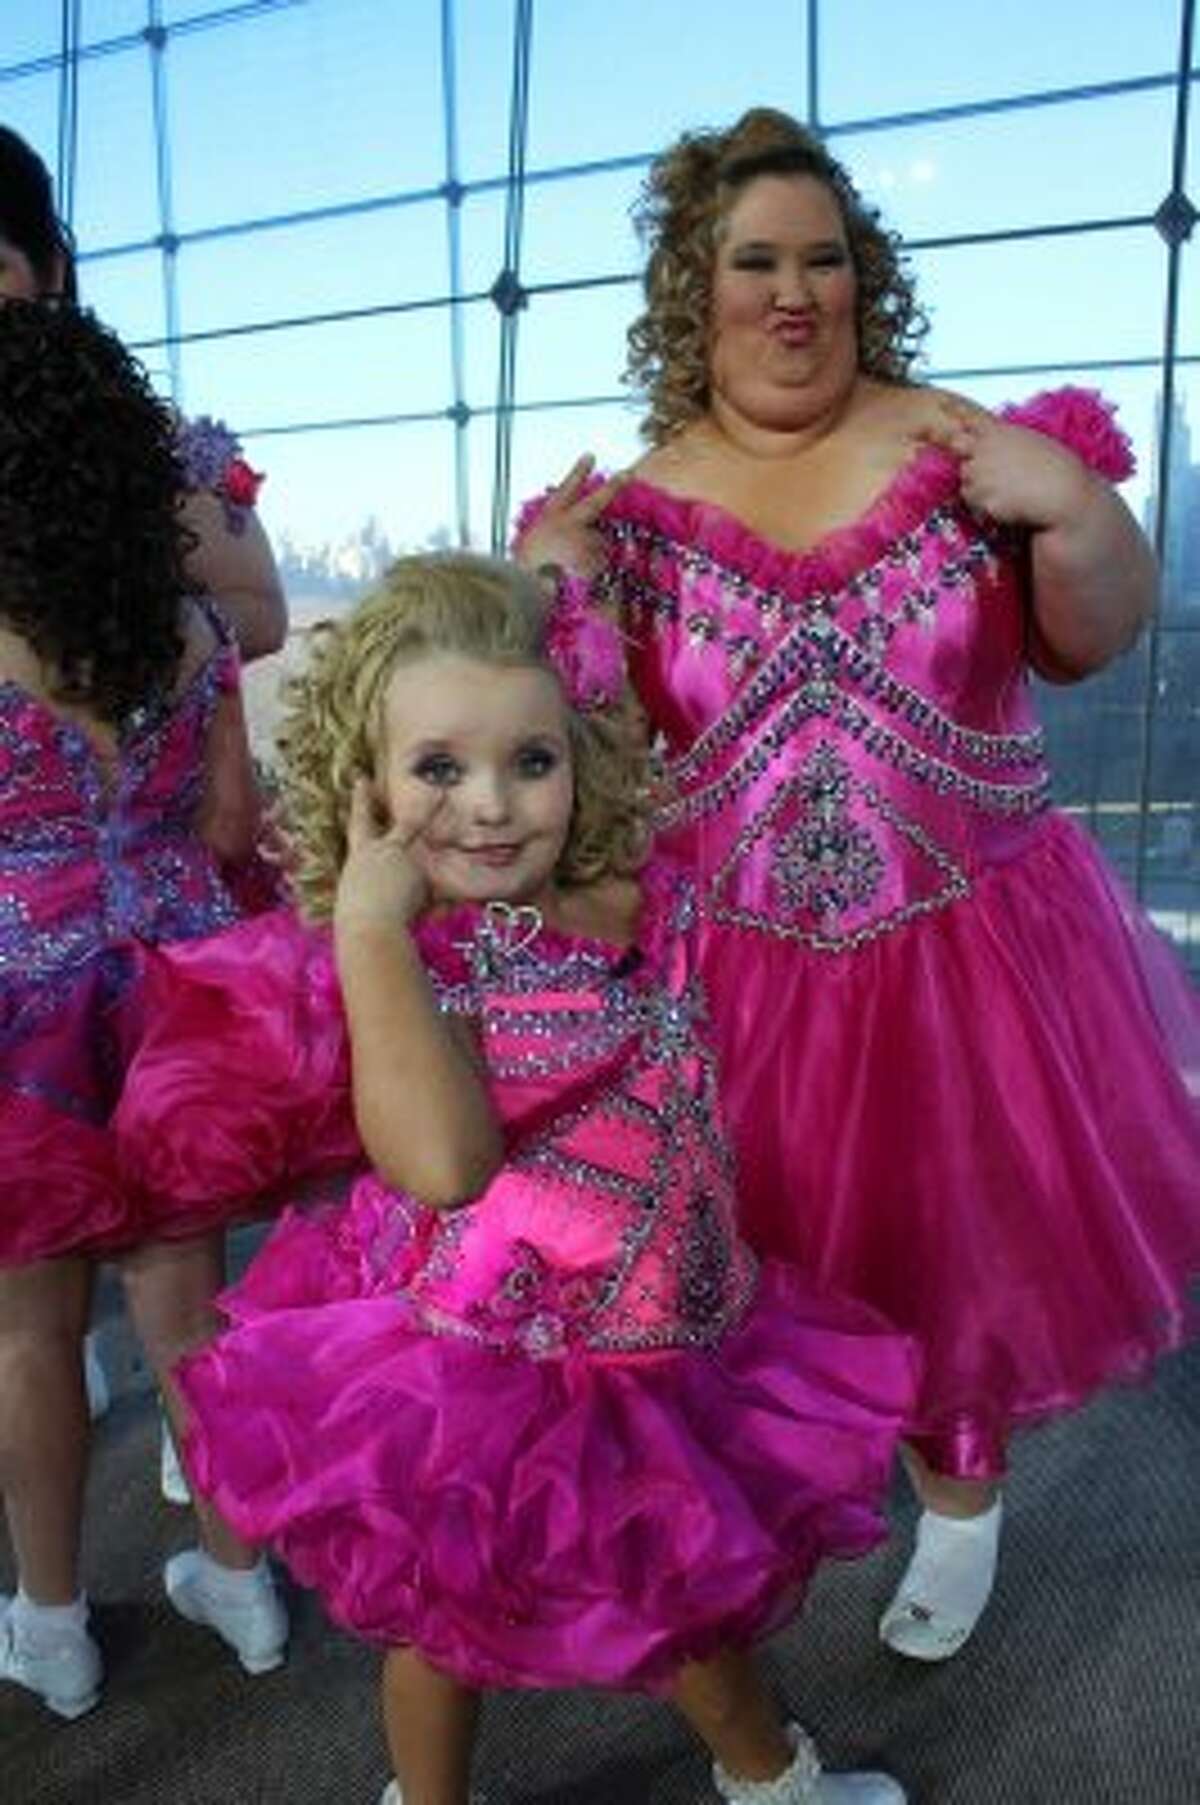 Toddlers and Tiaras' get a beauty pageant makeover